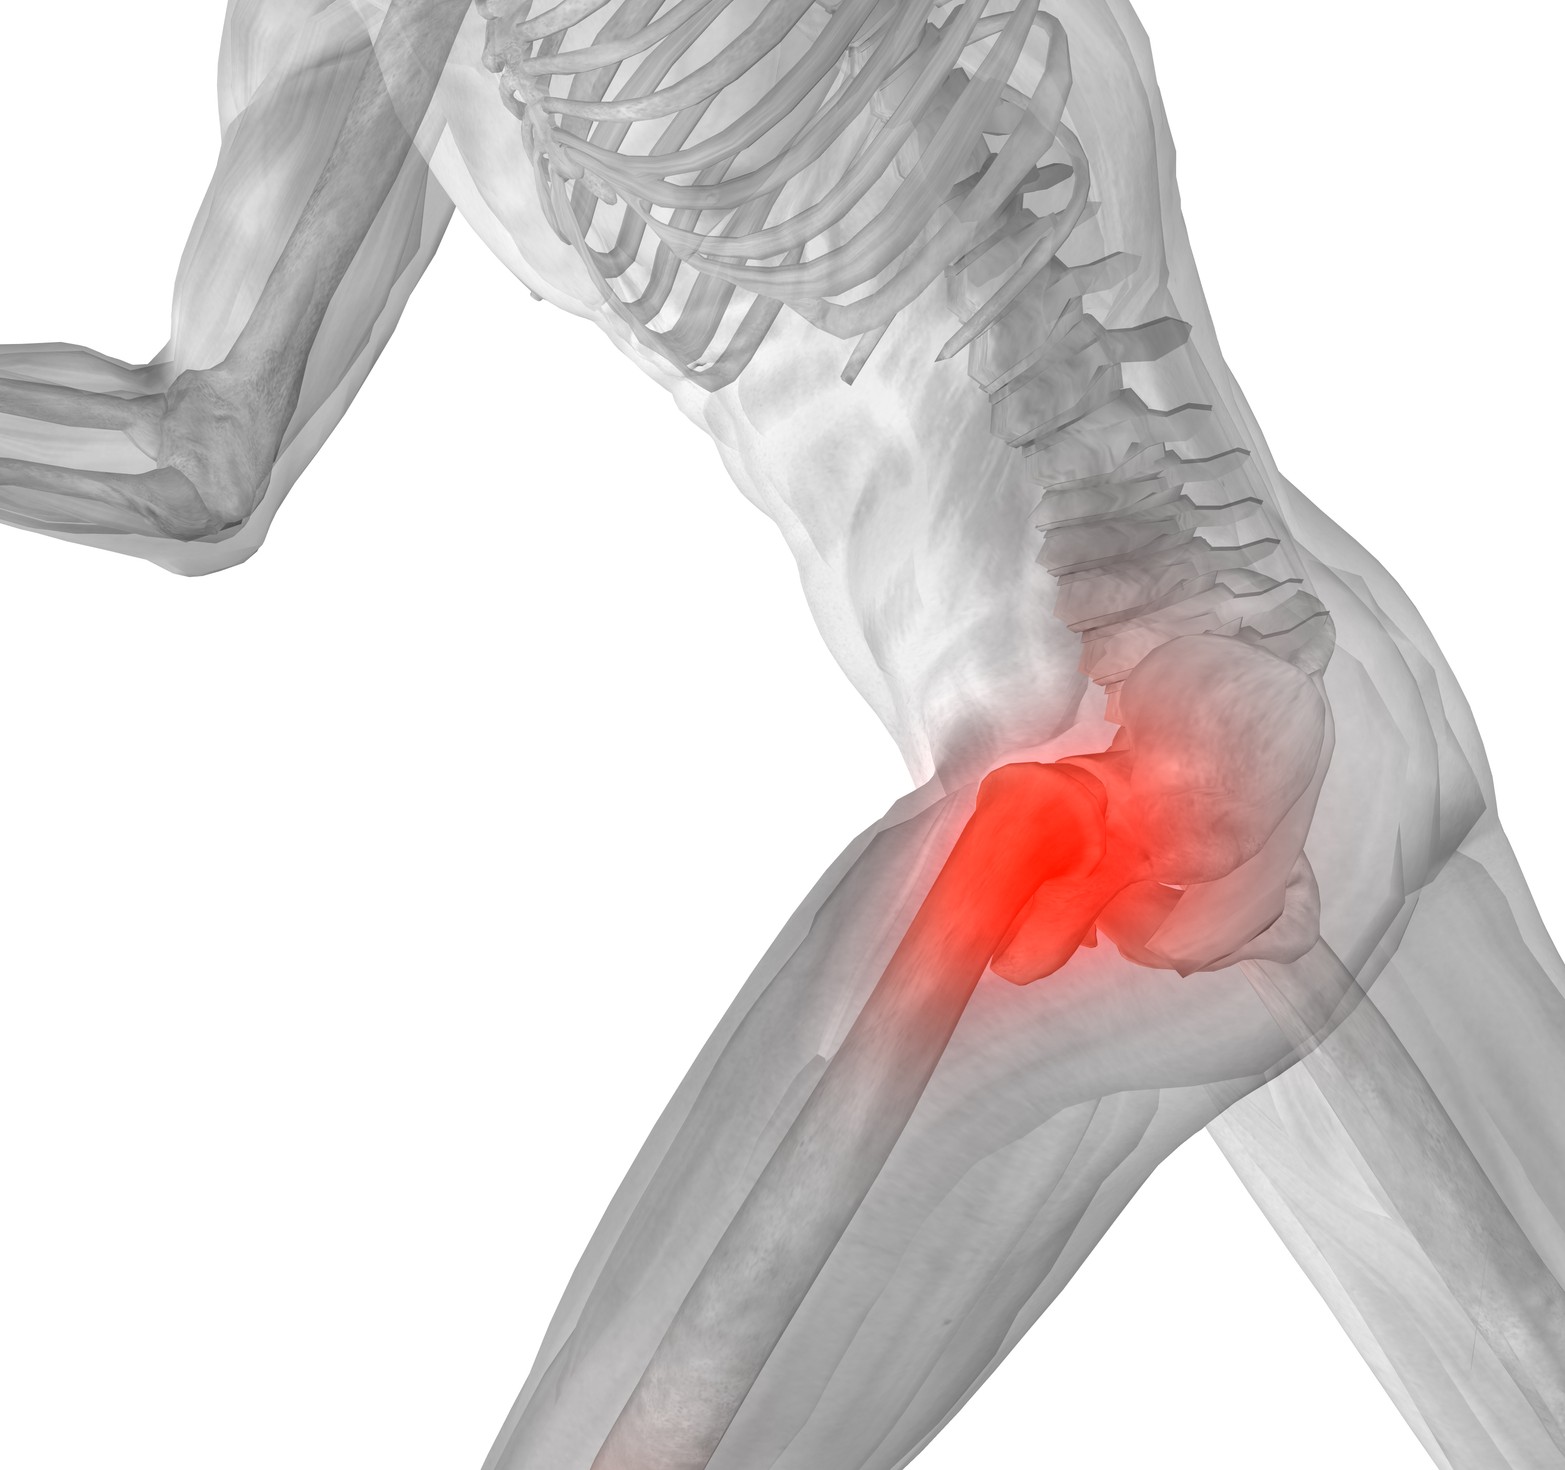 Hip Pain: How To Treat It And Why